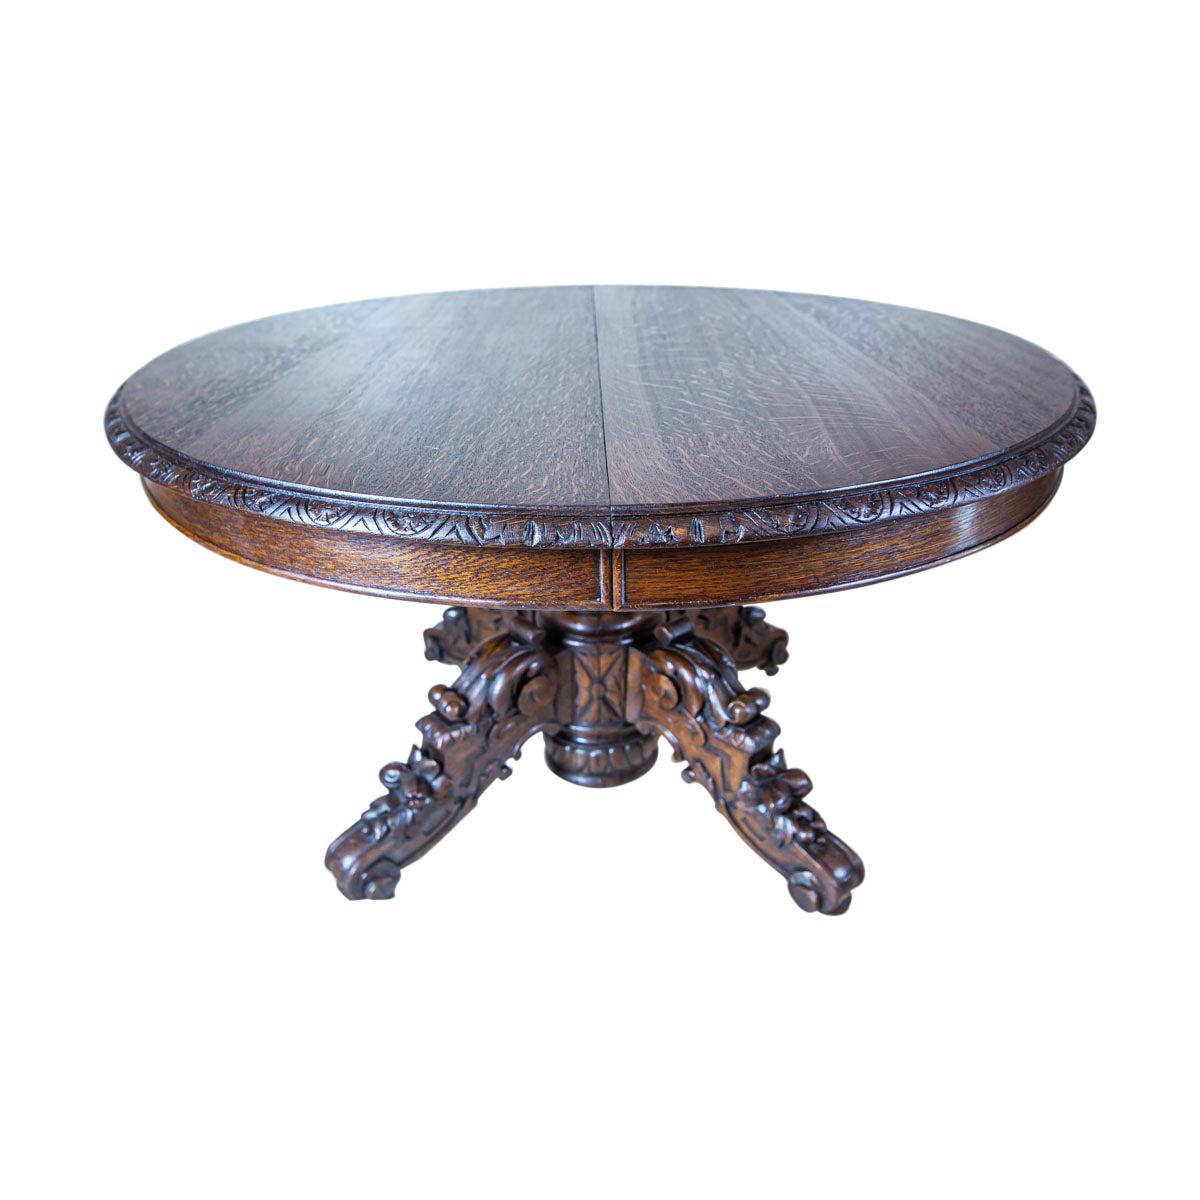 19th Century Oak Extendable Table for 16 People